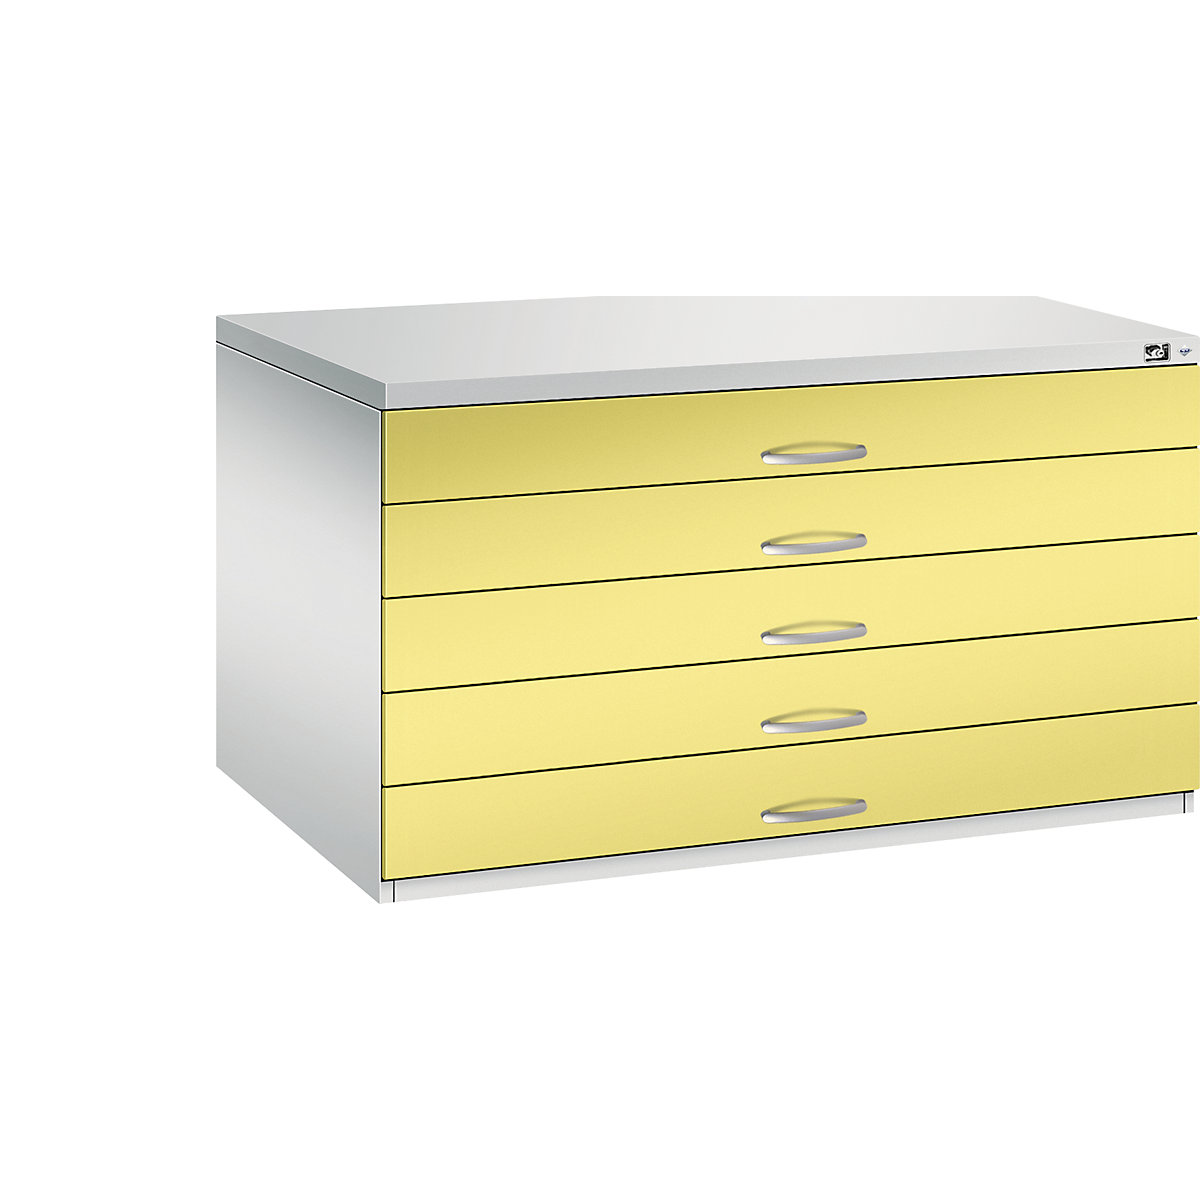 Drawing cabinet – C+P, A0, 5 drawers, height 760 mm, light grey / sulphur yellow-22